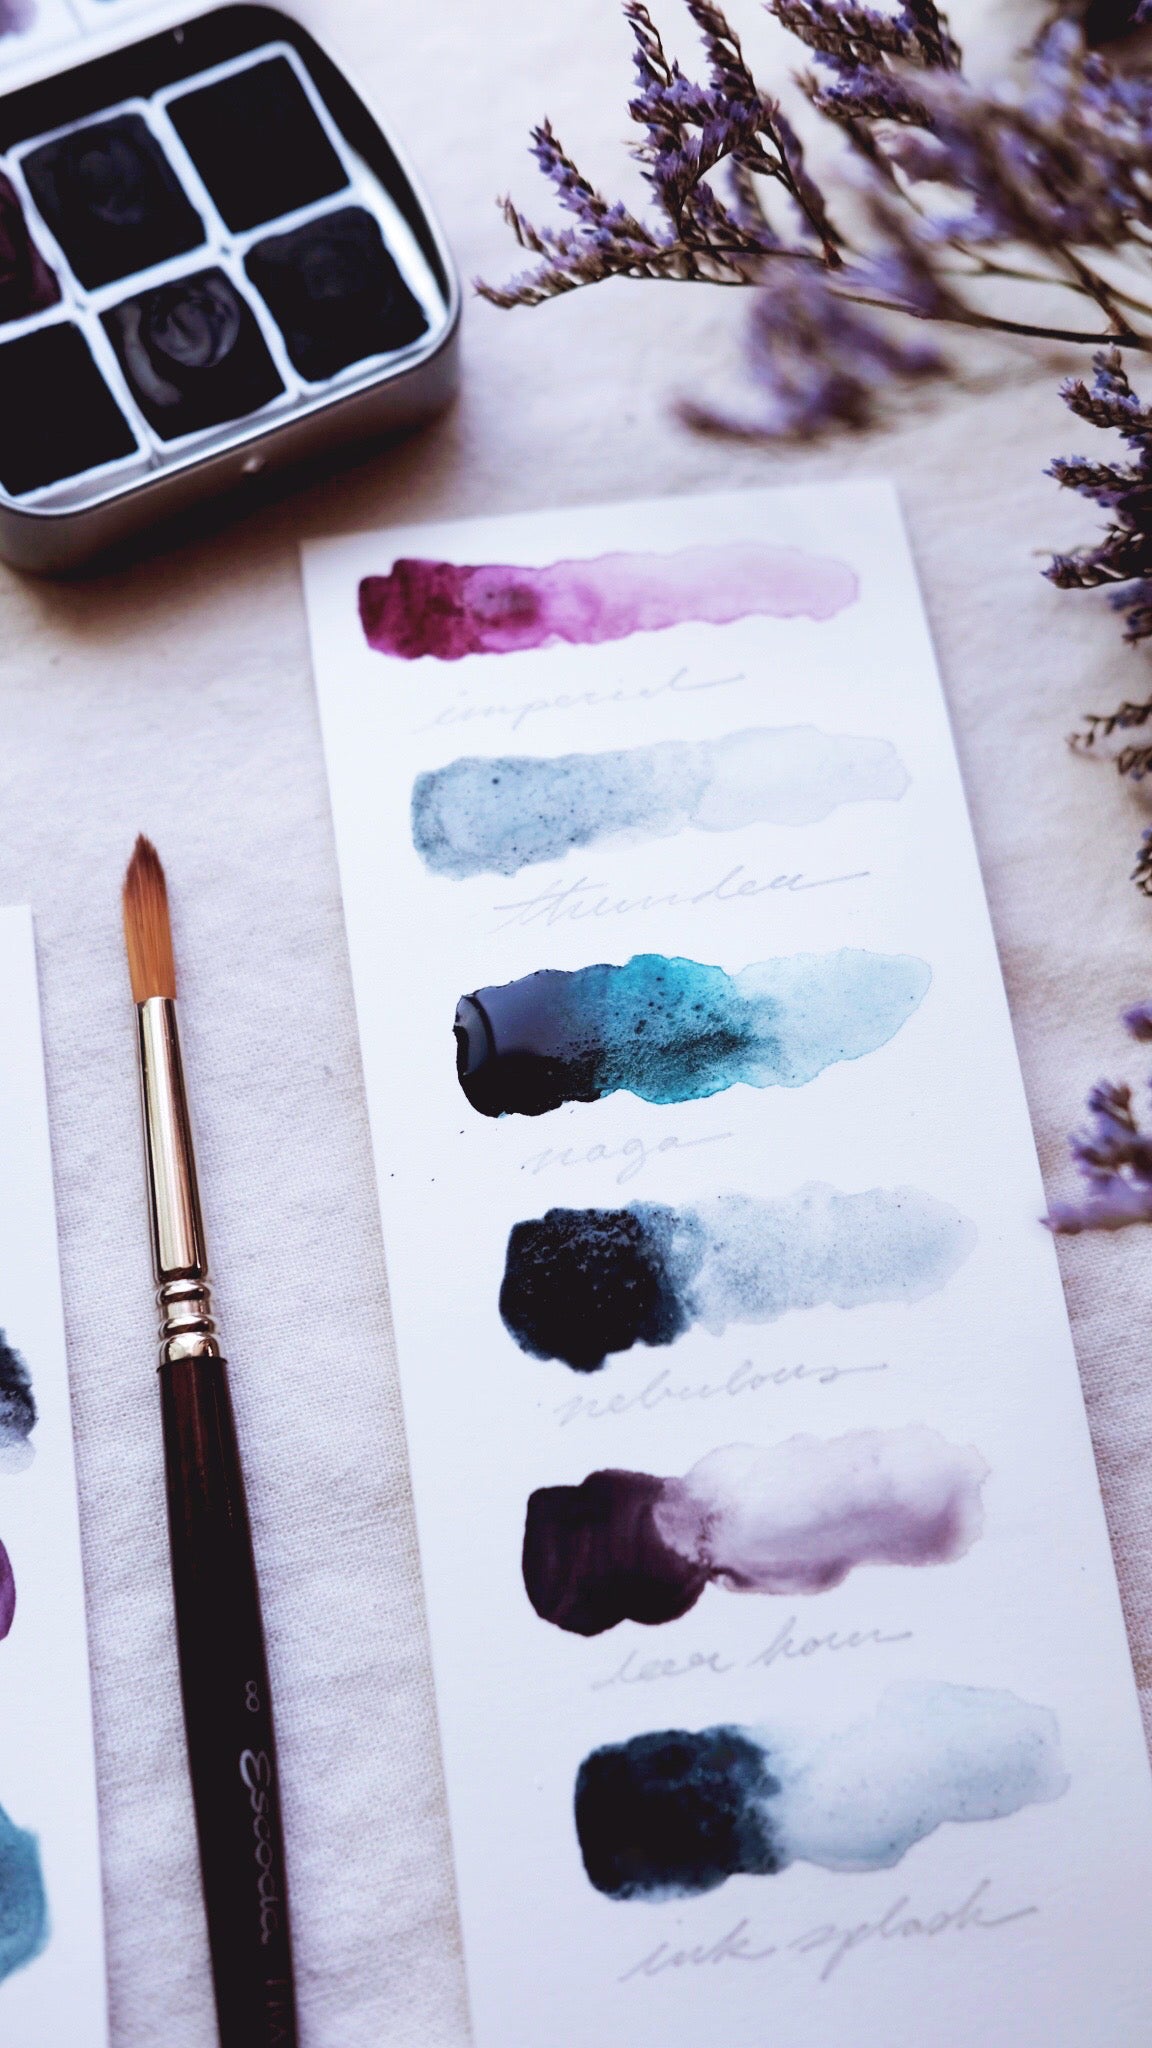 RESERVE for Rose + Cloud Dragon + Limited edition Mineral watercolor palette